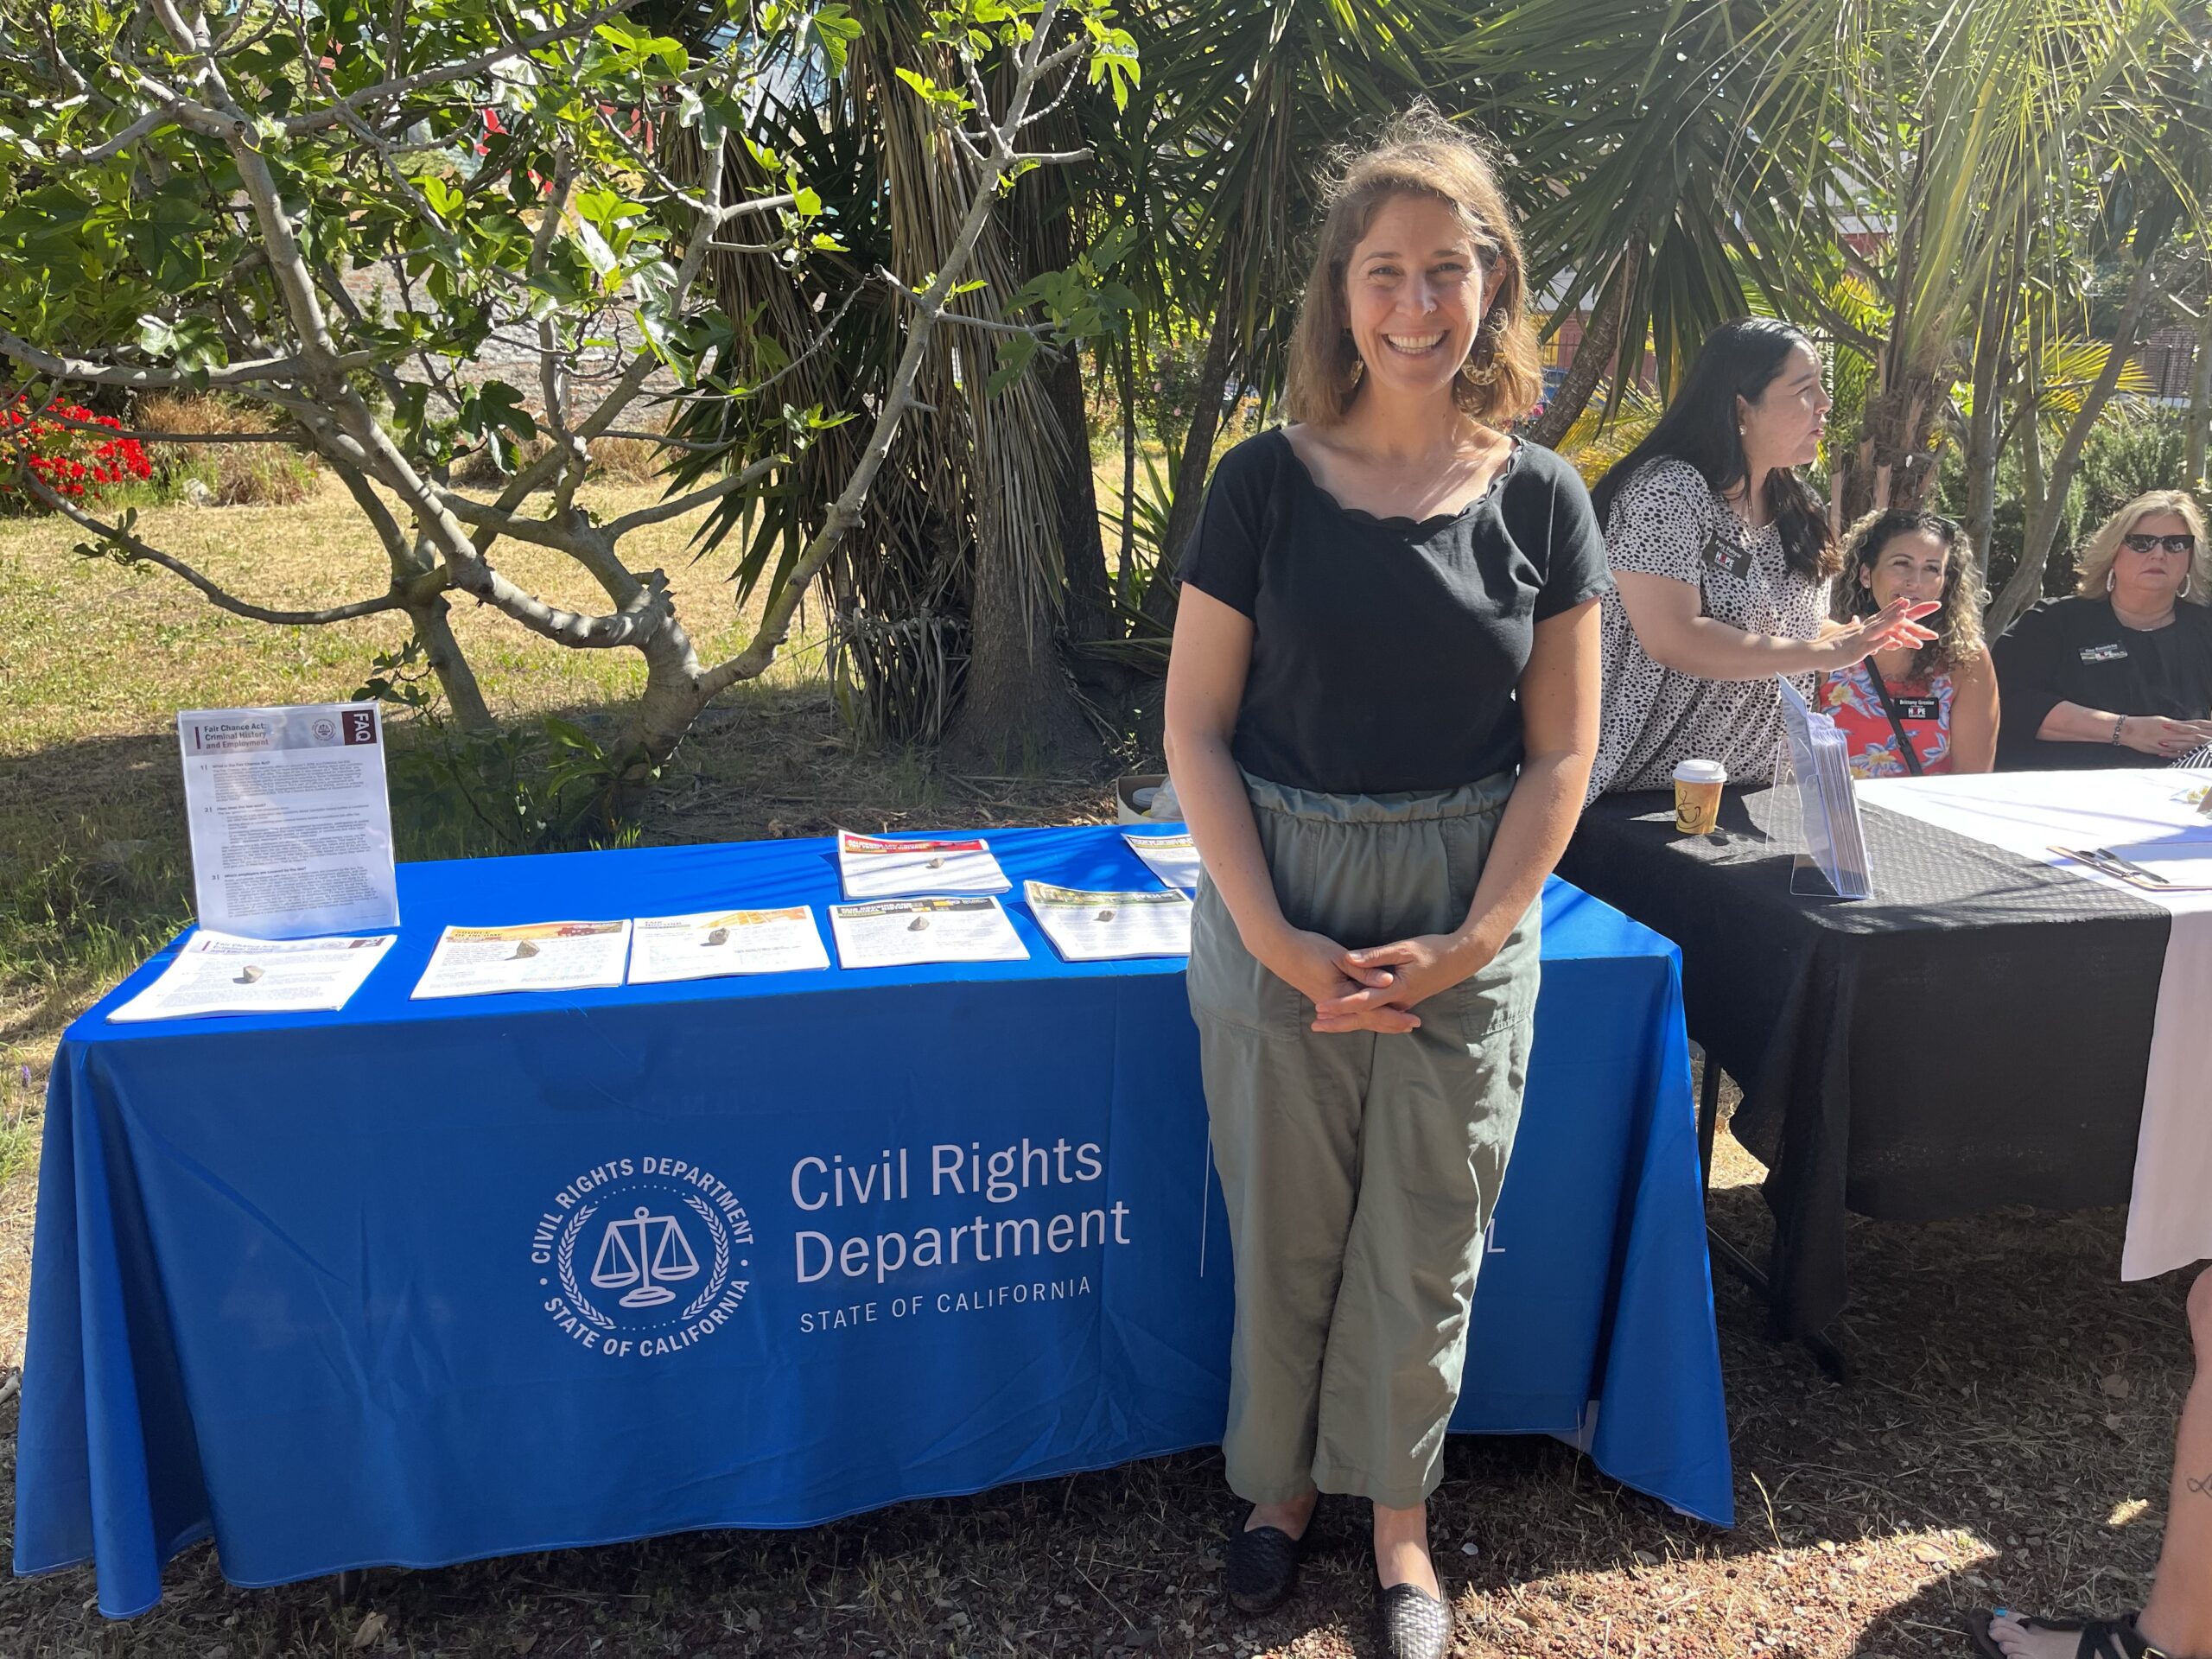 Lily Harvey at an outreach event. She is in front of a table with the CRD logo on it